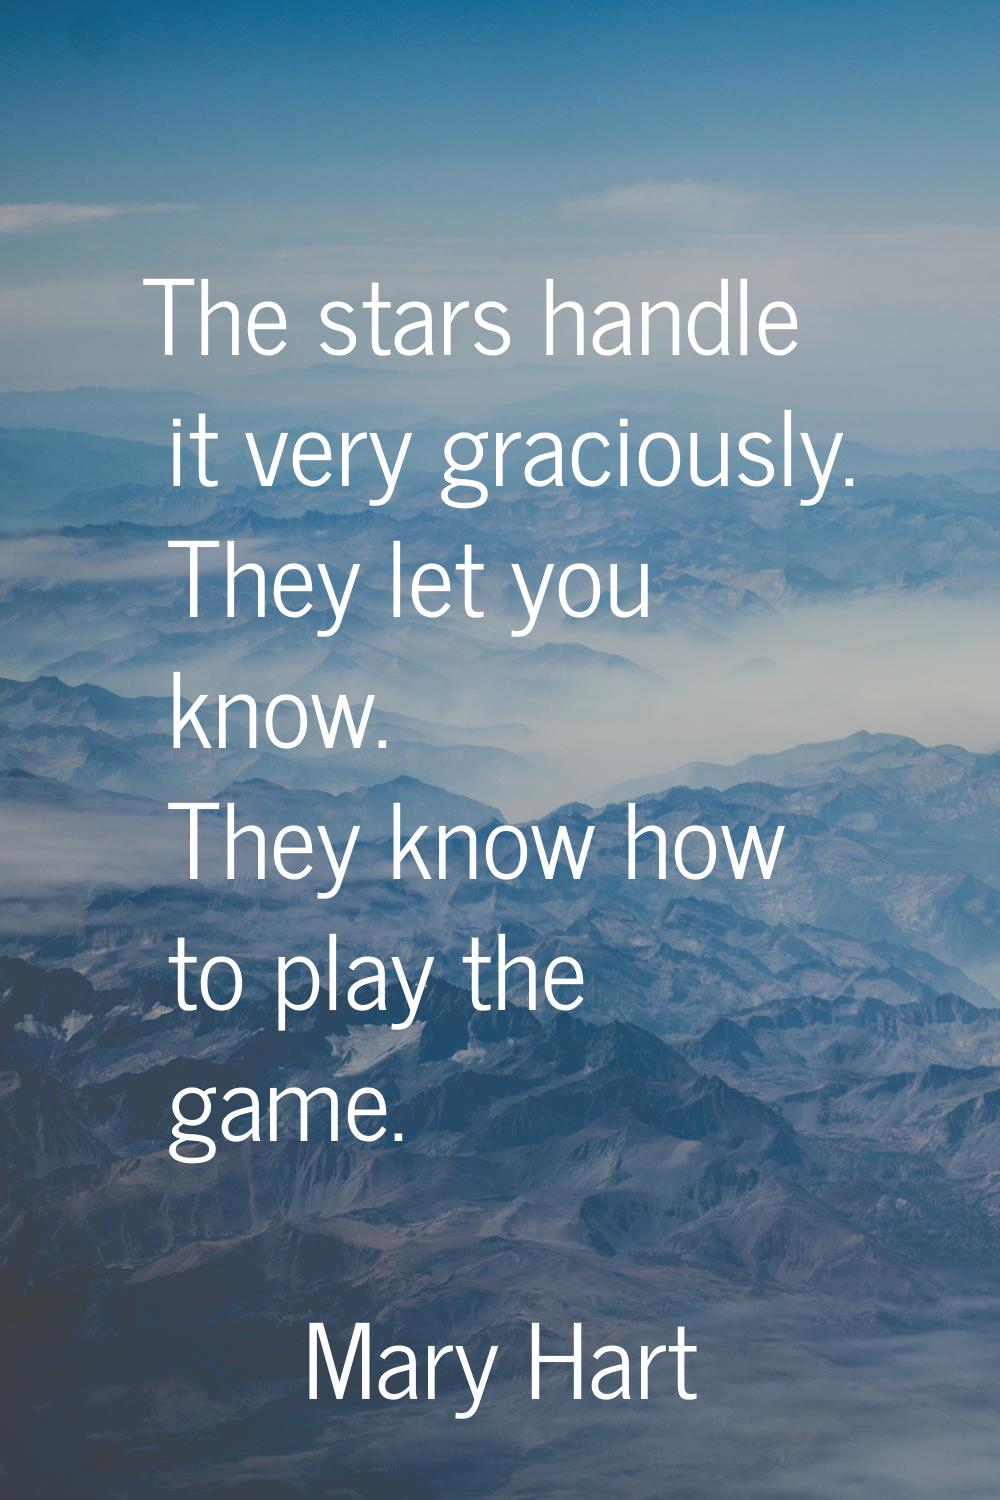 The stars handle it very graciously. They let you know. They know how to play the game.